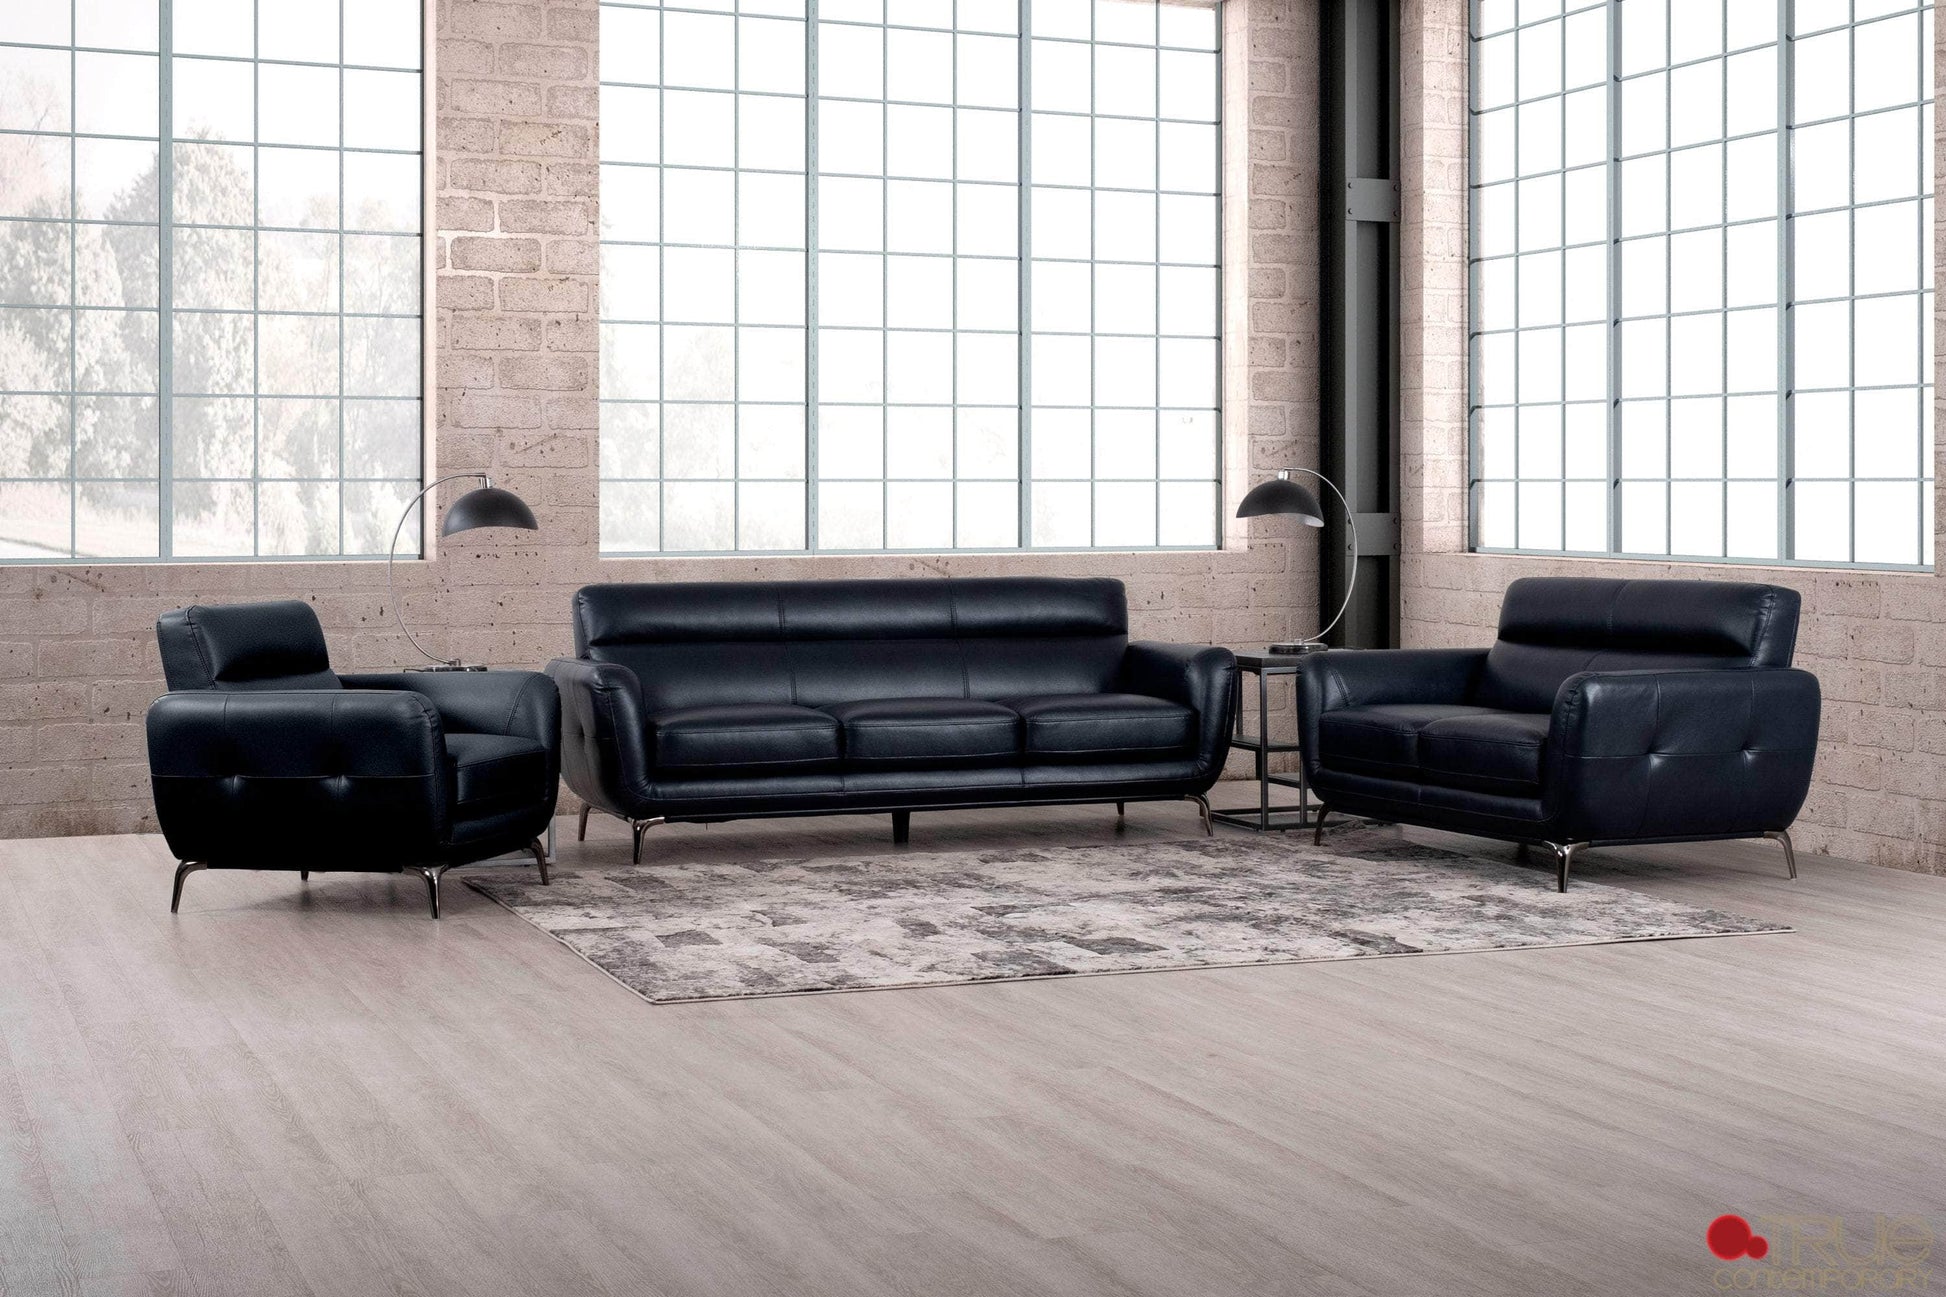 True Contemporary Sofa Set Midnight William 3 Piece Tufted Faux Leather Sofa and Loveseat Set - Available in 2 Colours